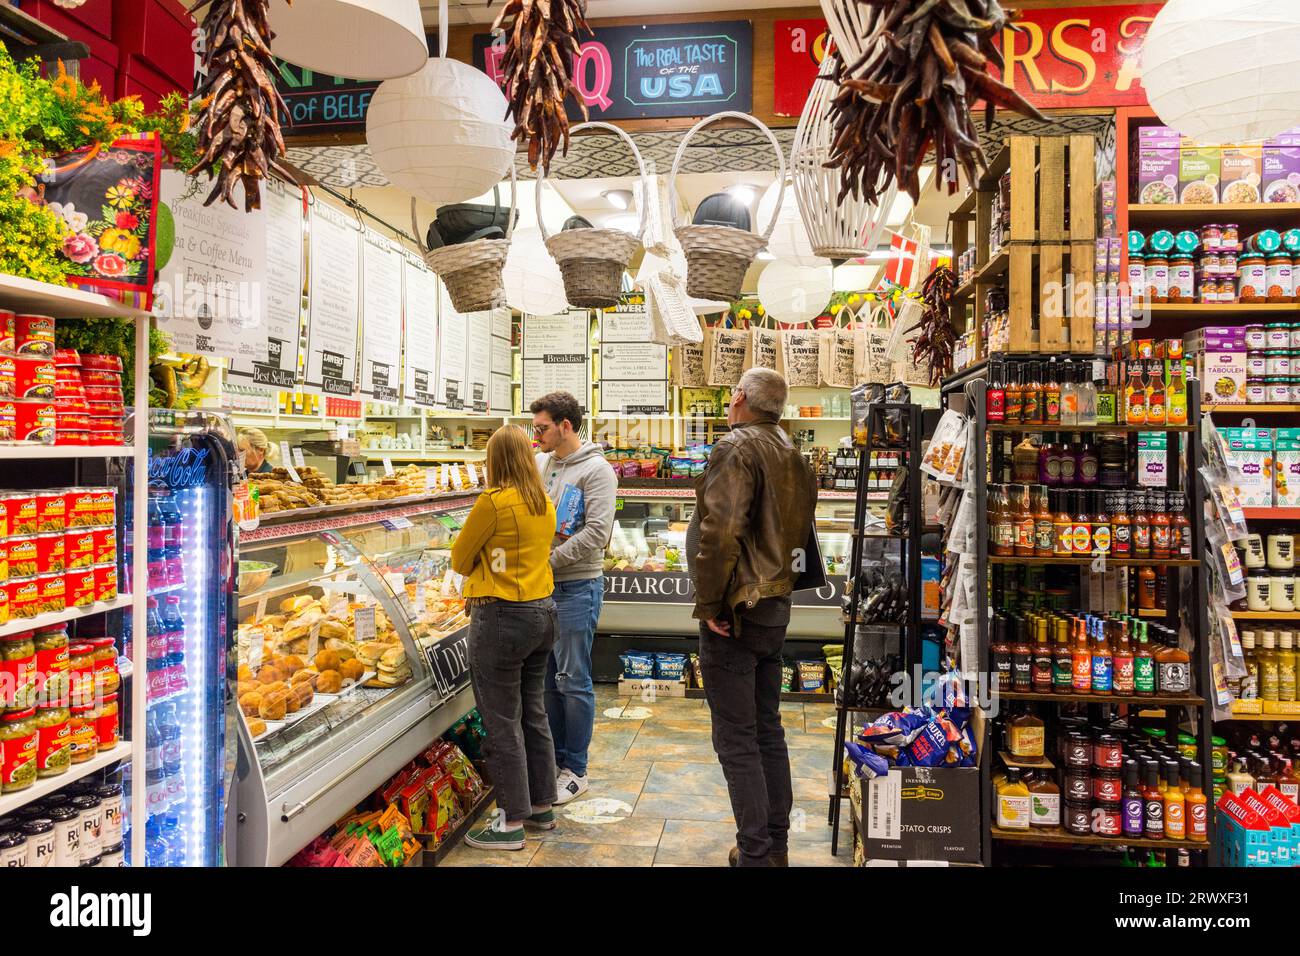 Sawers Ltd, a famous deli and fine food shop cafe in Belfast, Northern Ireland. Interior view of shop. Stock Photo